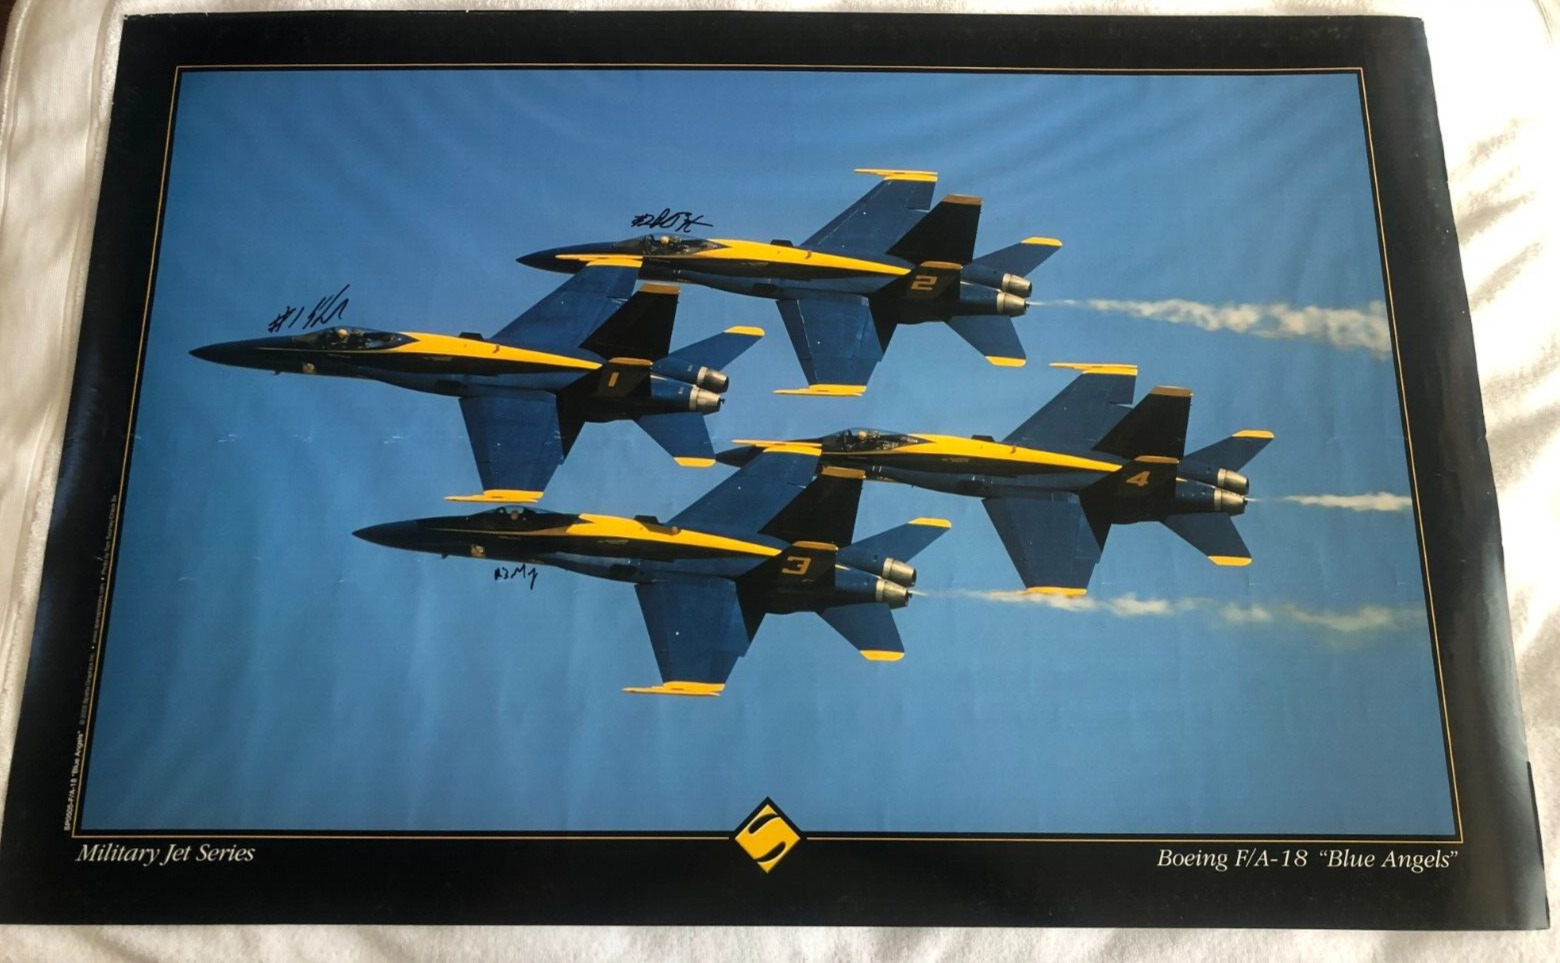 Blue Angels Autographed Poster Military Jet Series Boeing F/A-18 by Tom Twomey